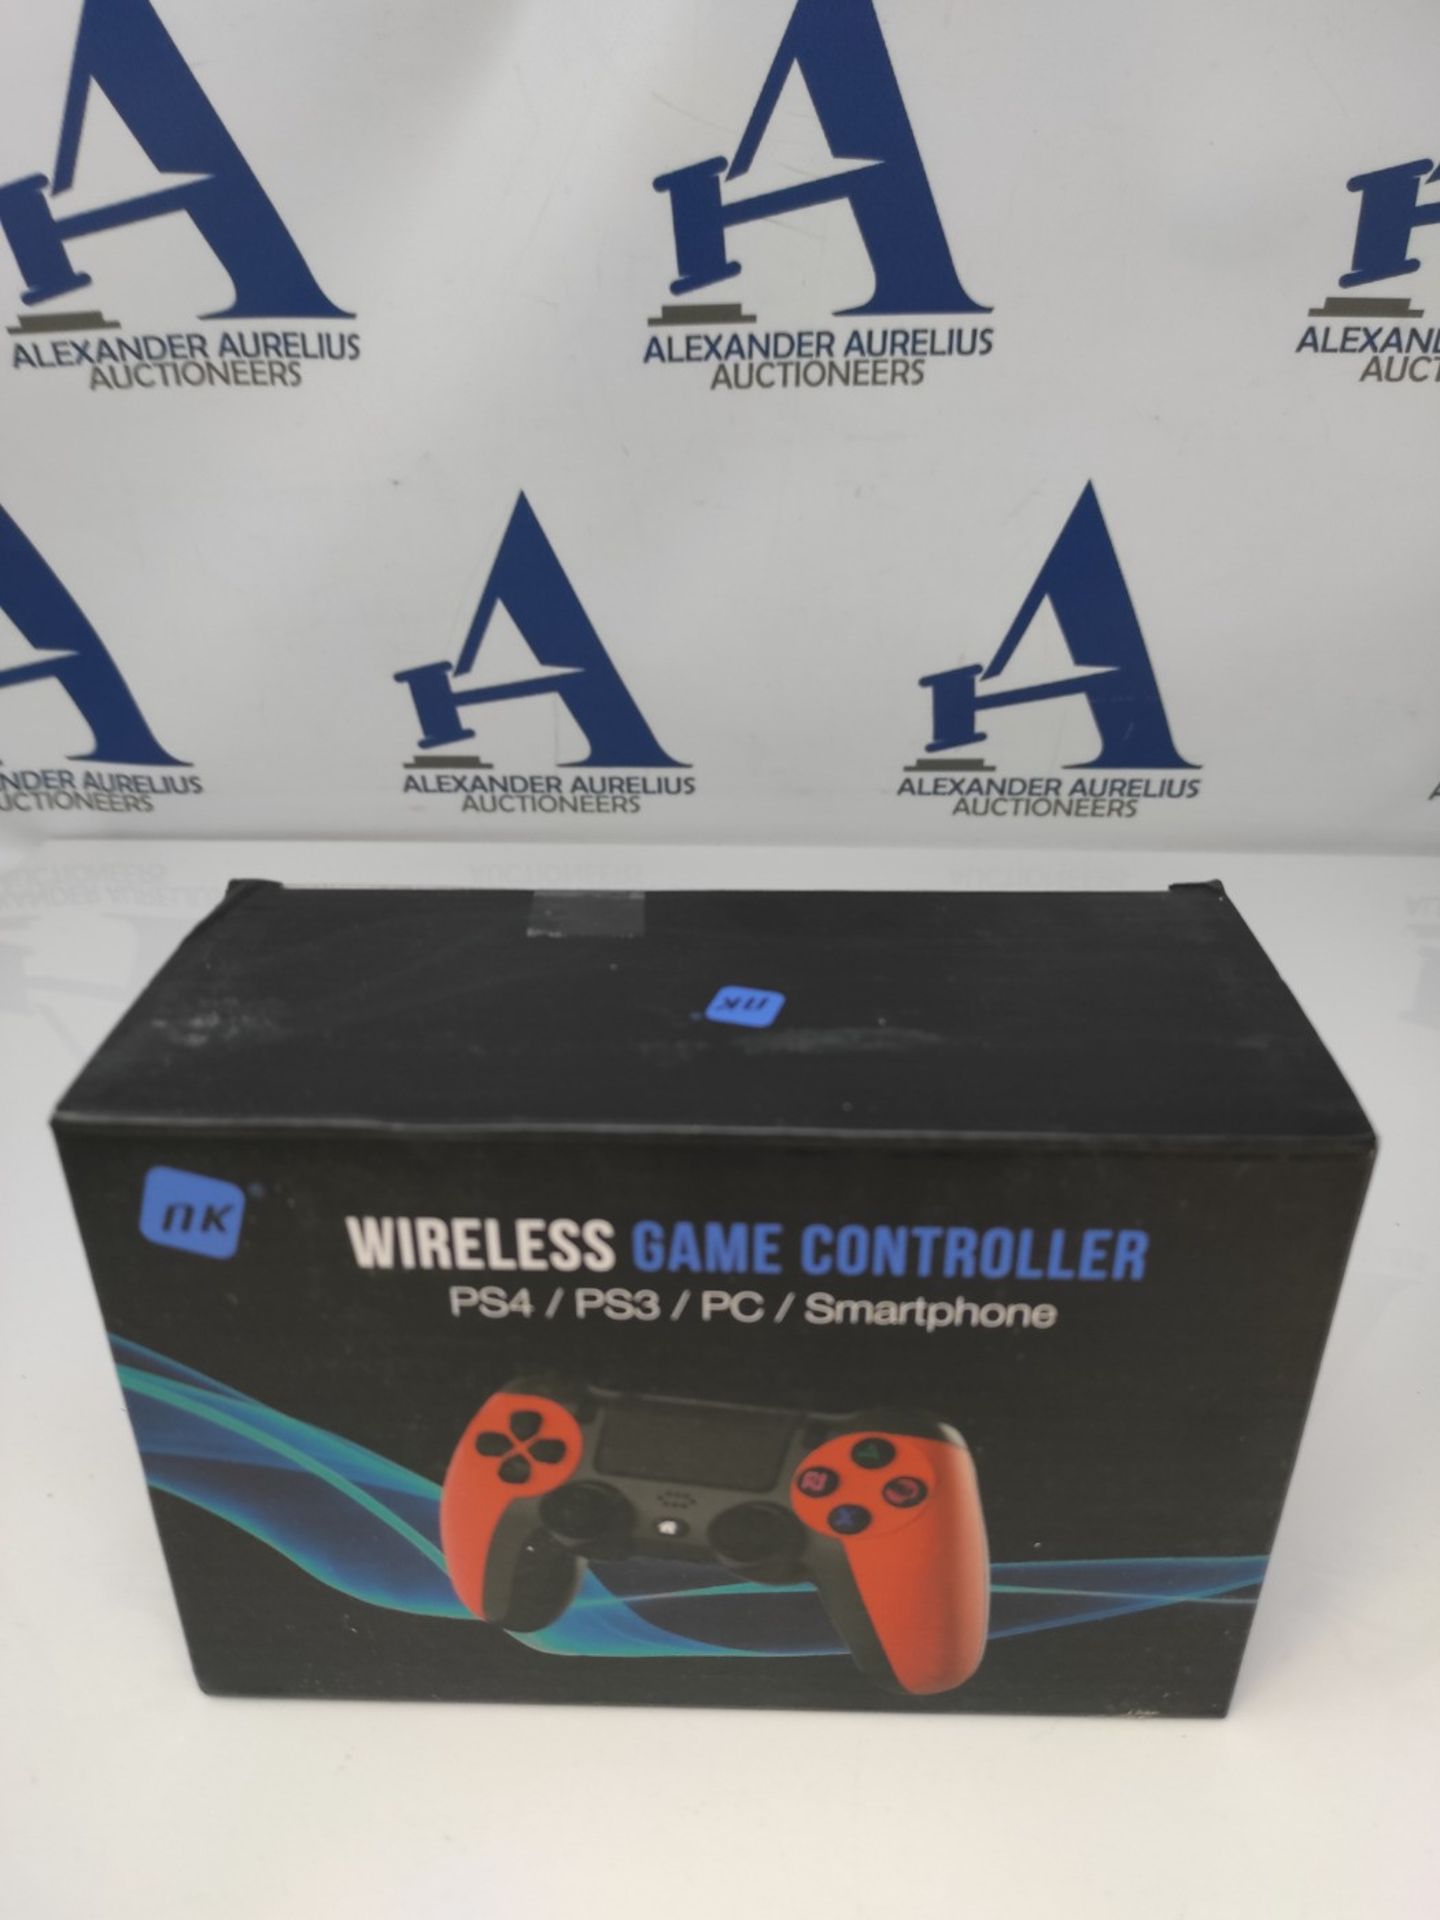 NK Mando for PS4 / PS3 / PC/Mobile Wireless - Wireless Controller with Dualshock, 6 ax - Image 2 of 3